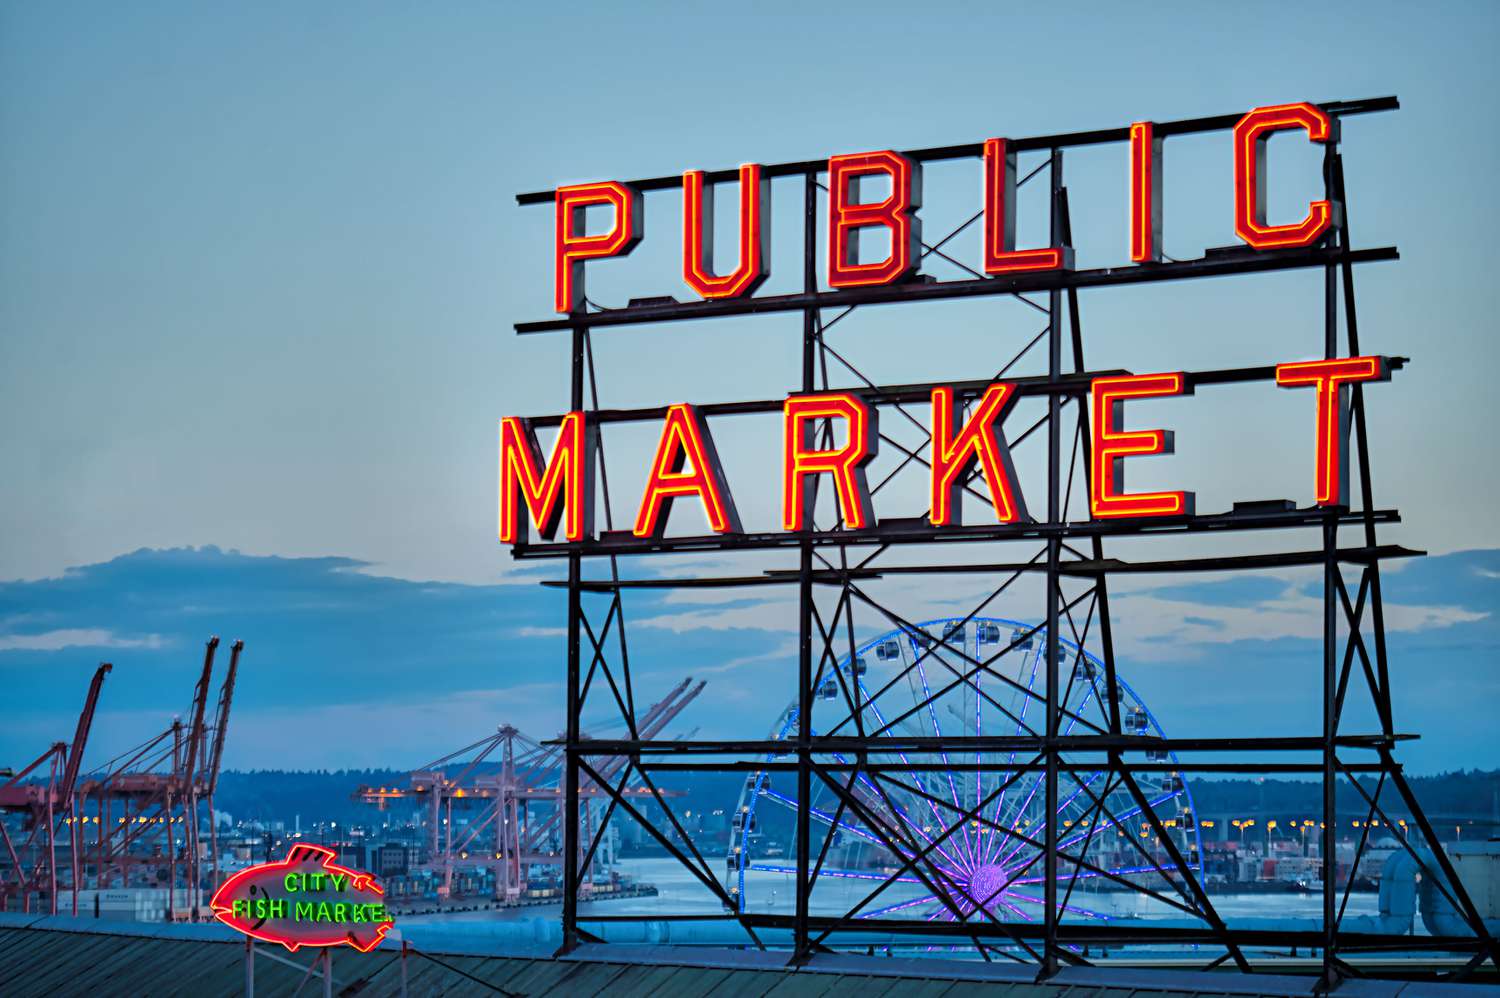 pikes place market sign